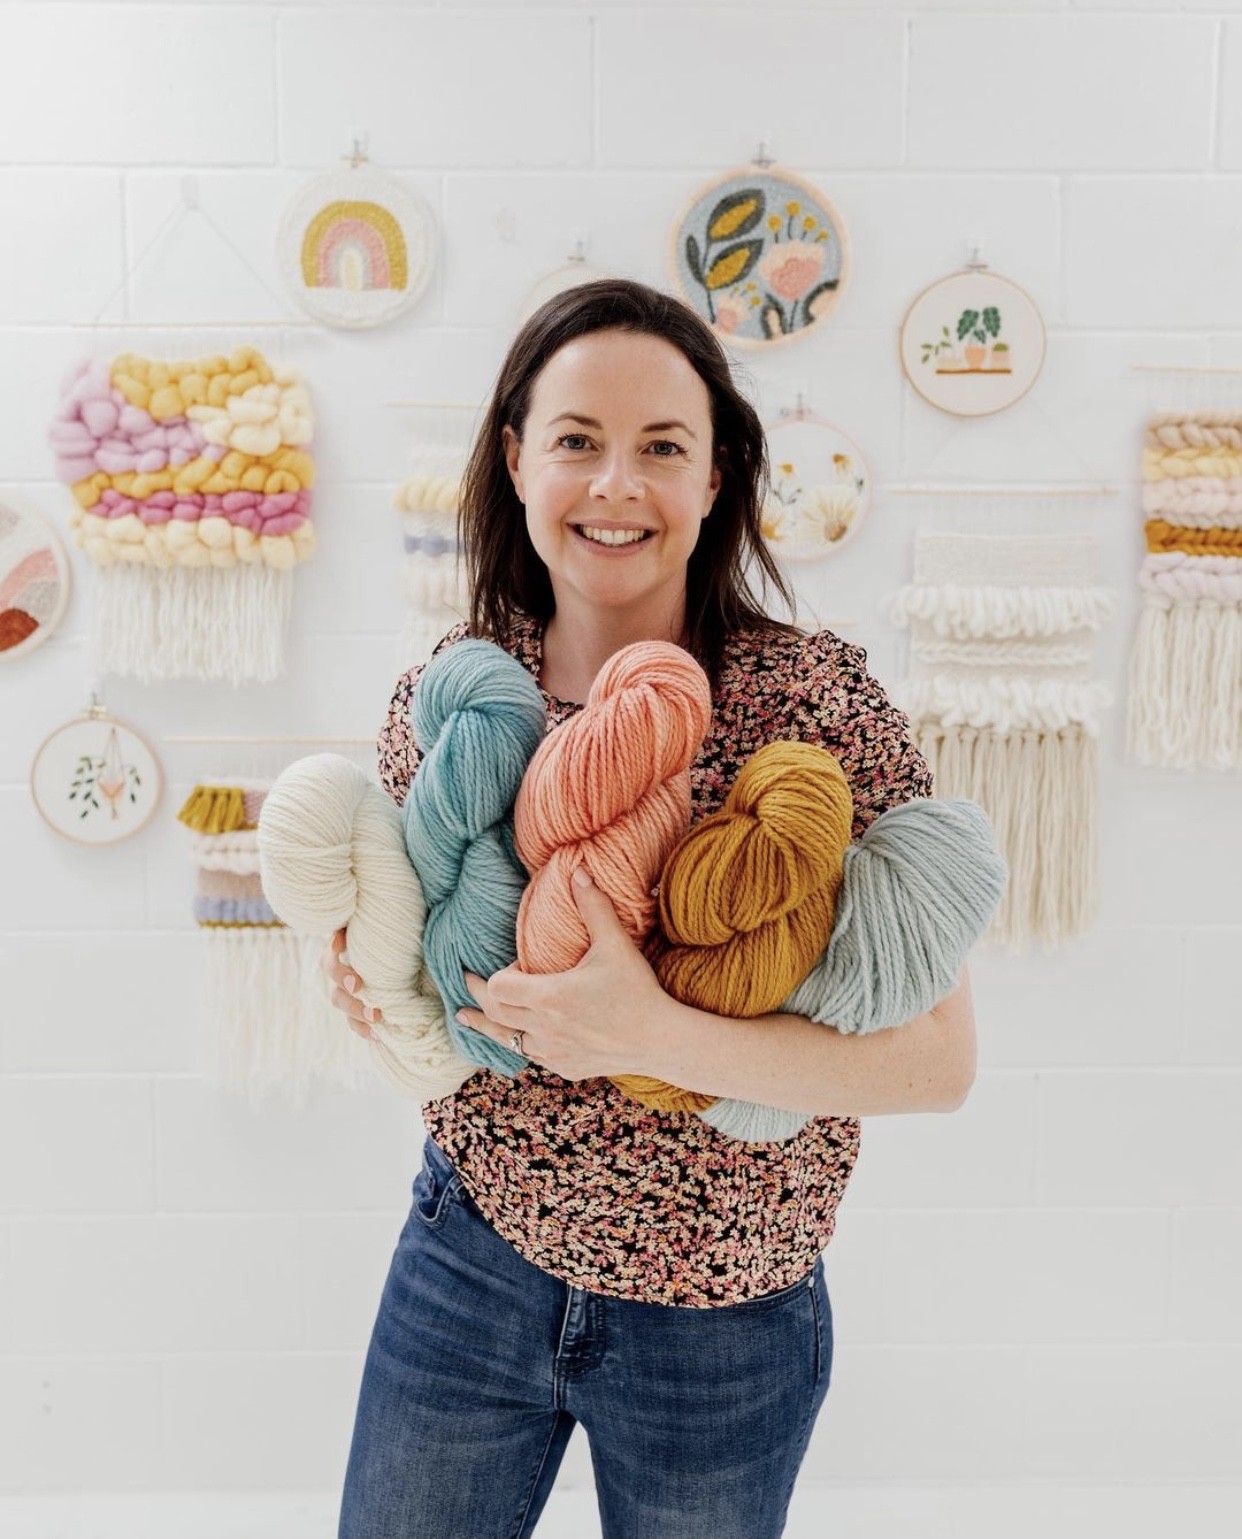 This image shows Julie (the creator of Clever Poppy) holding bundles of coloured punch needle wool.